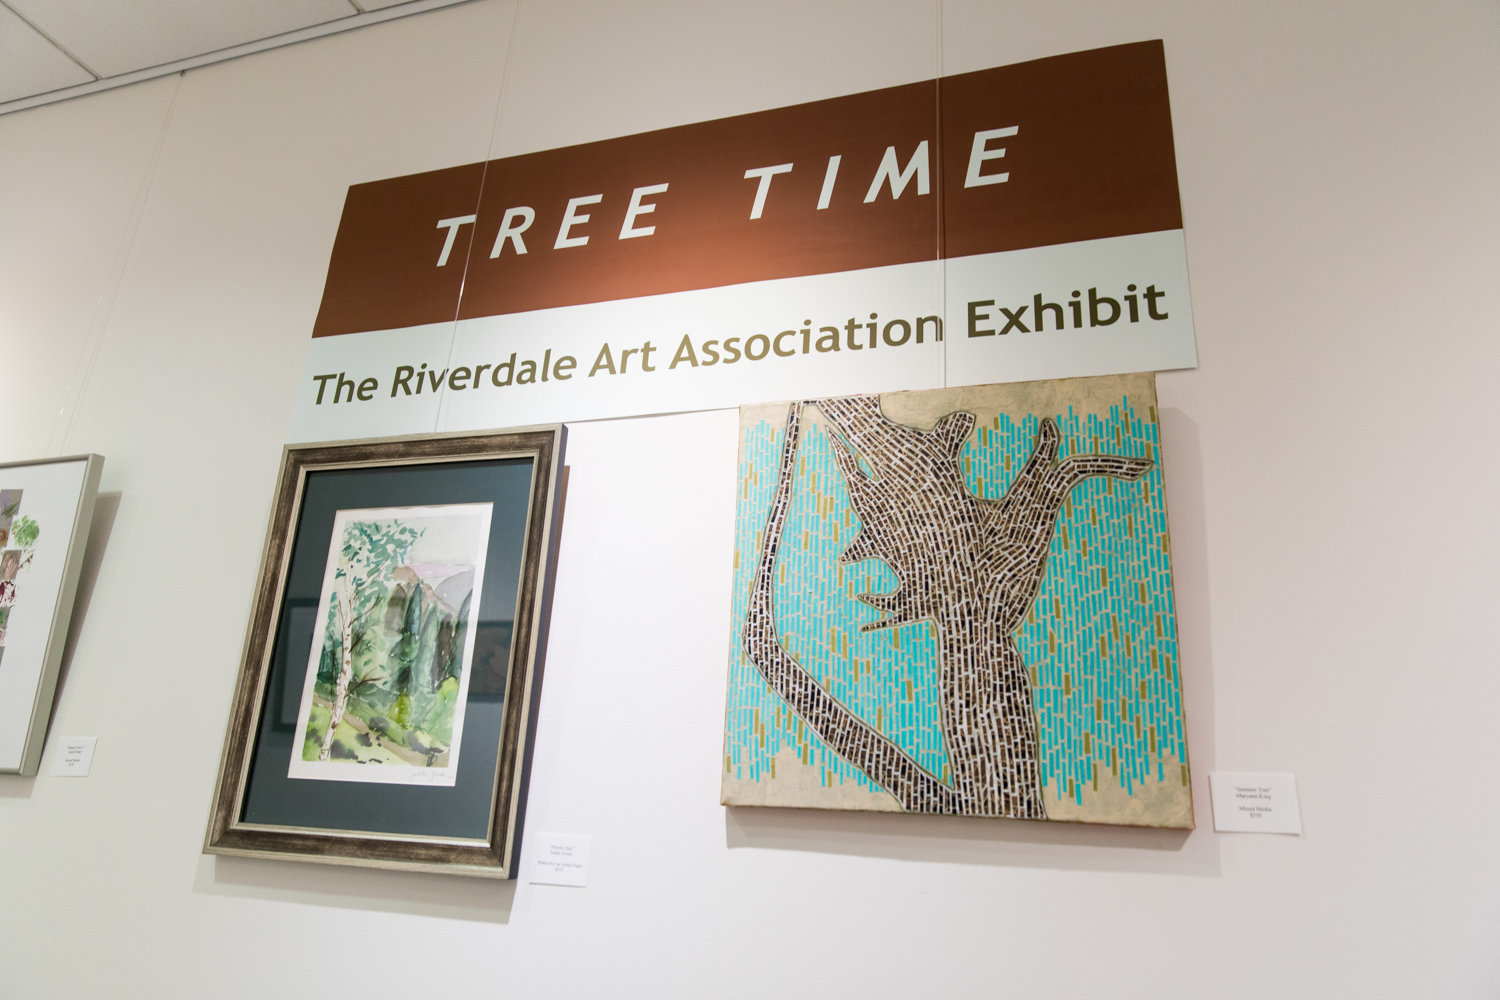 The Riverdale Y’s new exhibition ‘Tree Time’ showcases tree-themed artworks by members of the Riverdale Art Association. It is on display through Nov. 3.